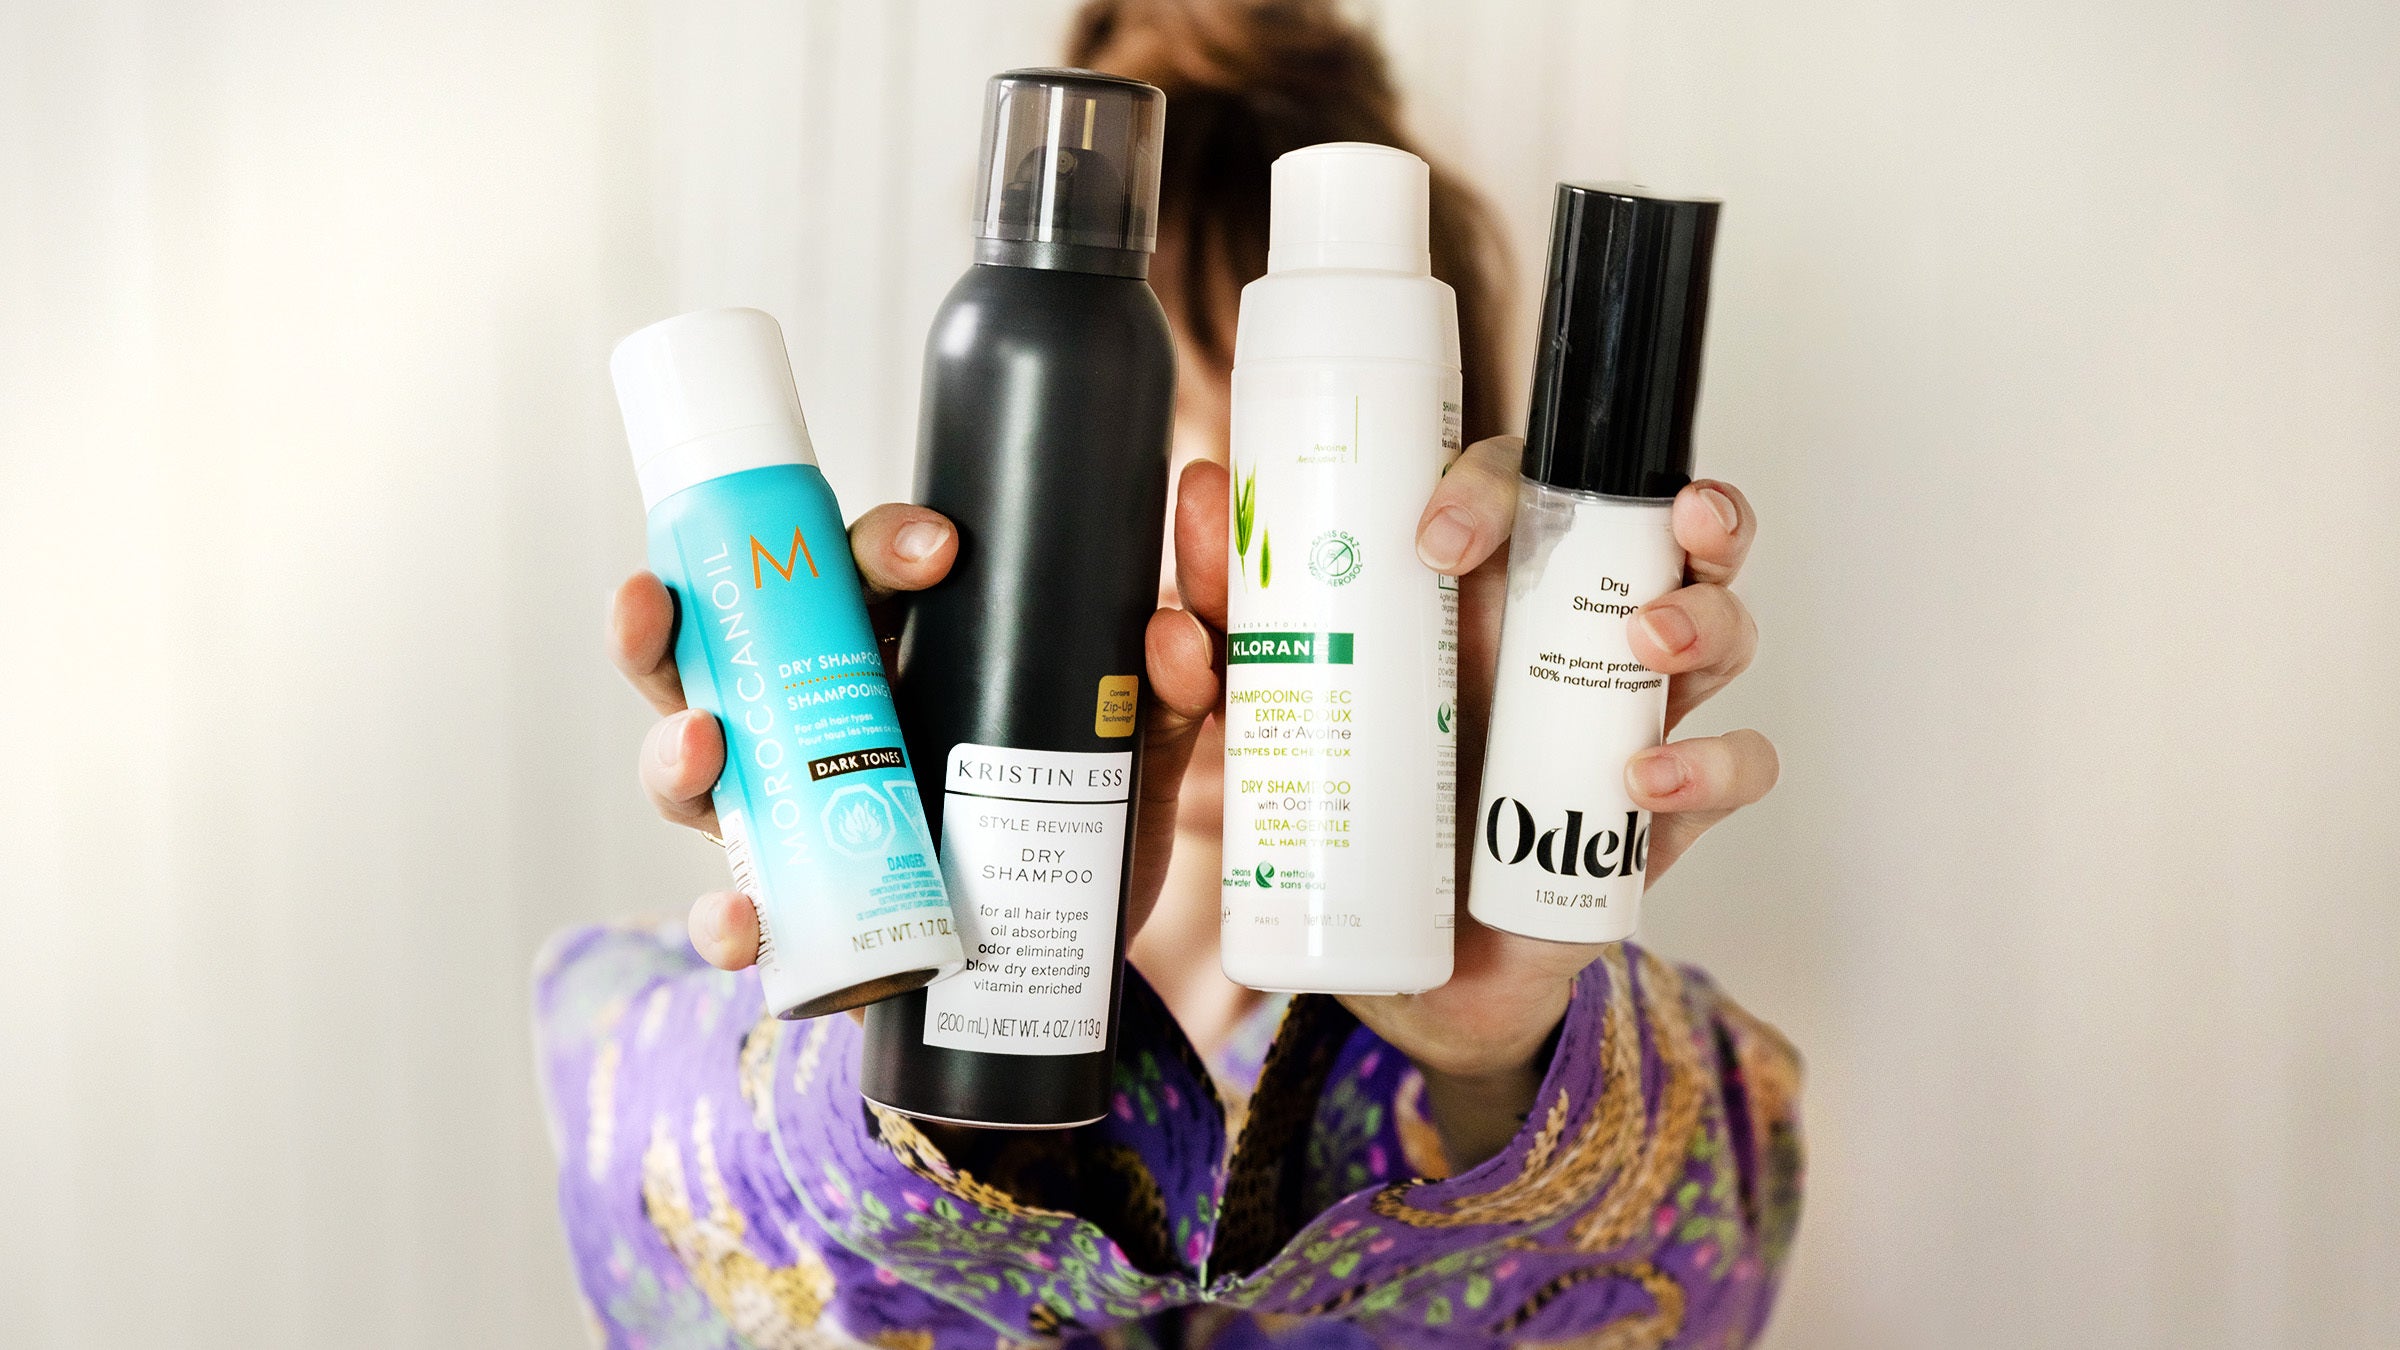 Do They Work? We Found The Best Dry Shampoo for Your Hair